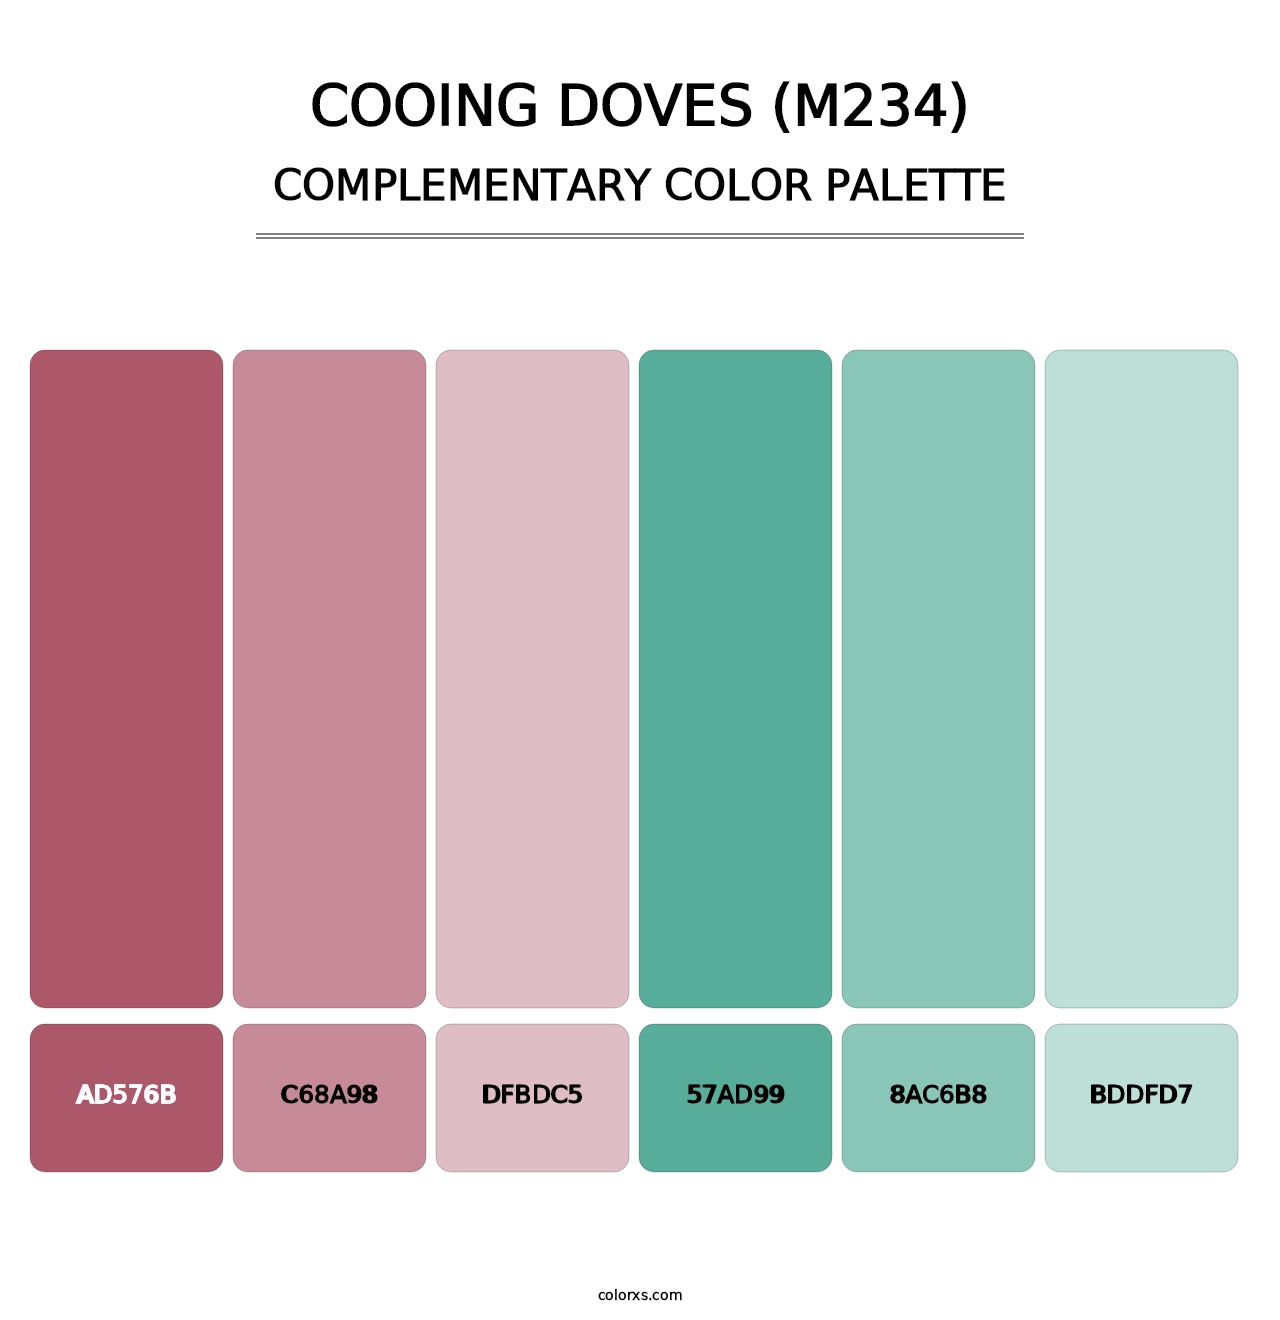 Cooing Doves (M234) - Complementary Color Palette